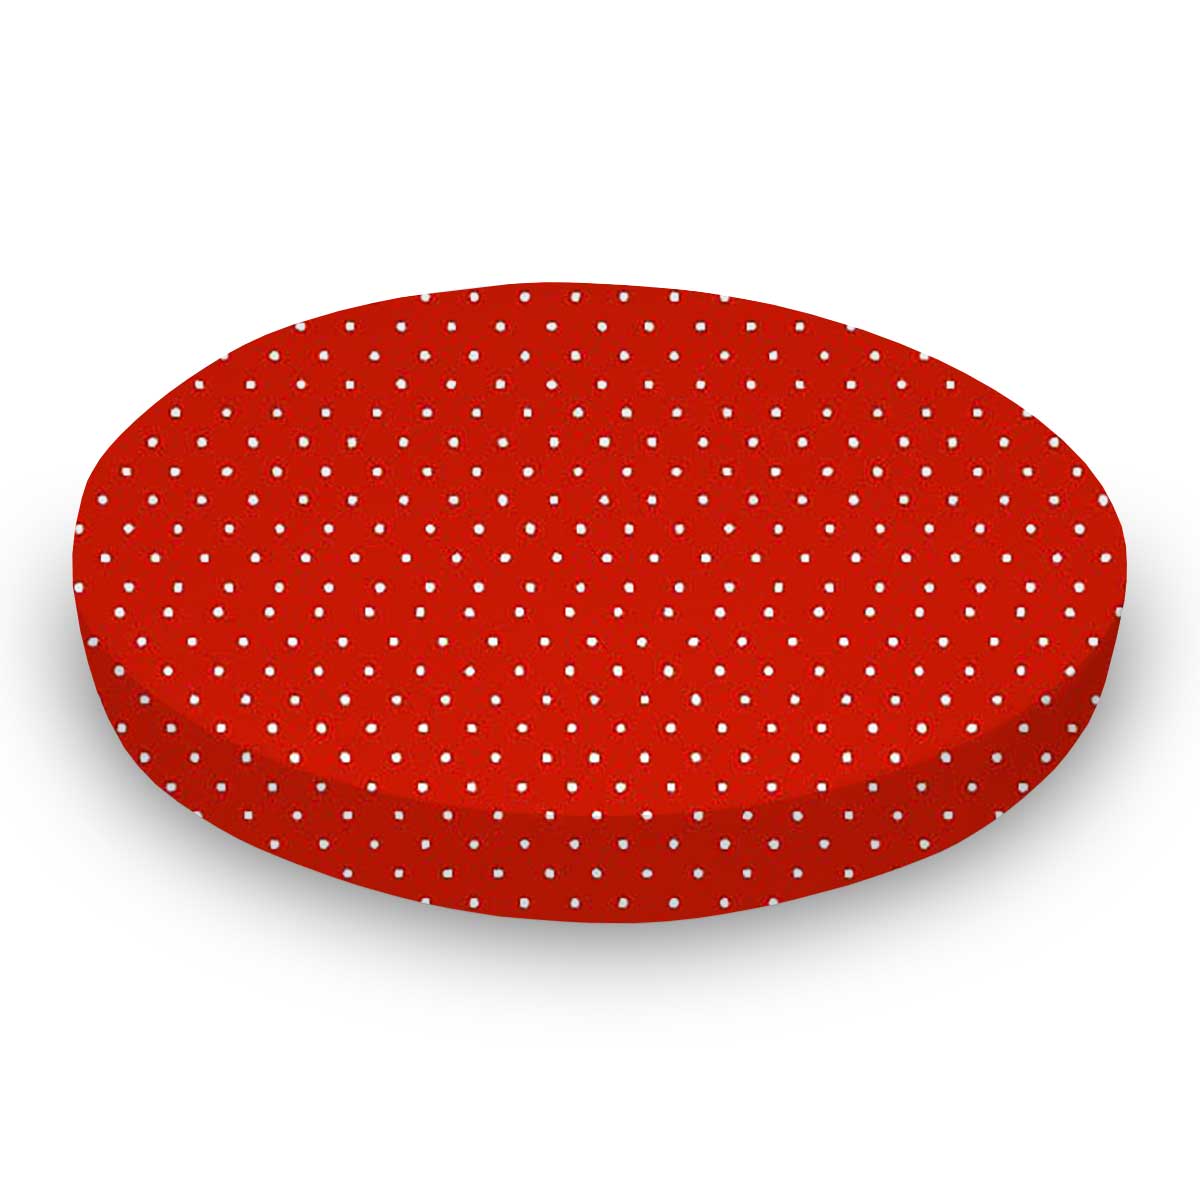 Oval Crib (Stokke Sleepi) - Primary Pindots Red Woven - Fitted  Oval